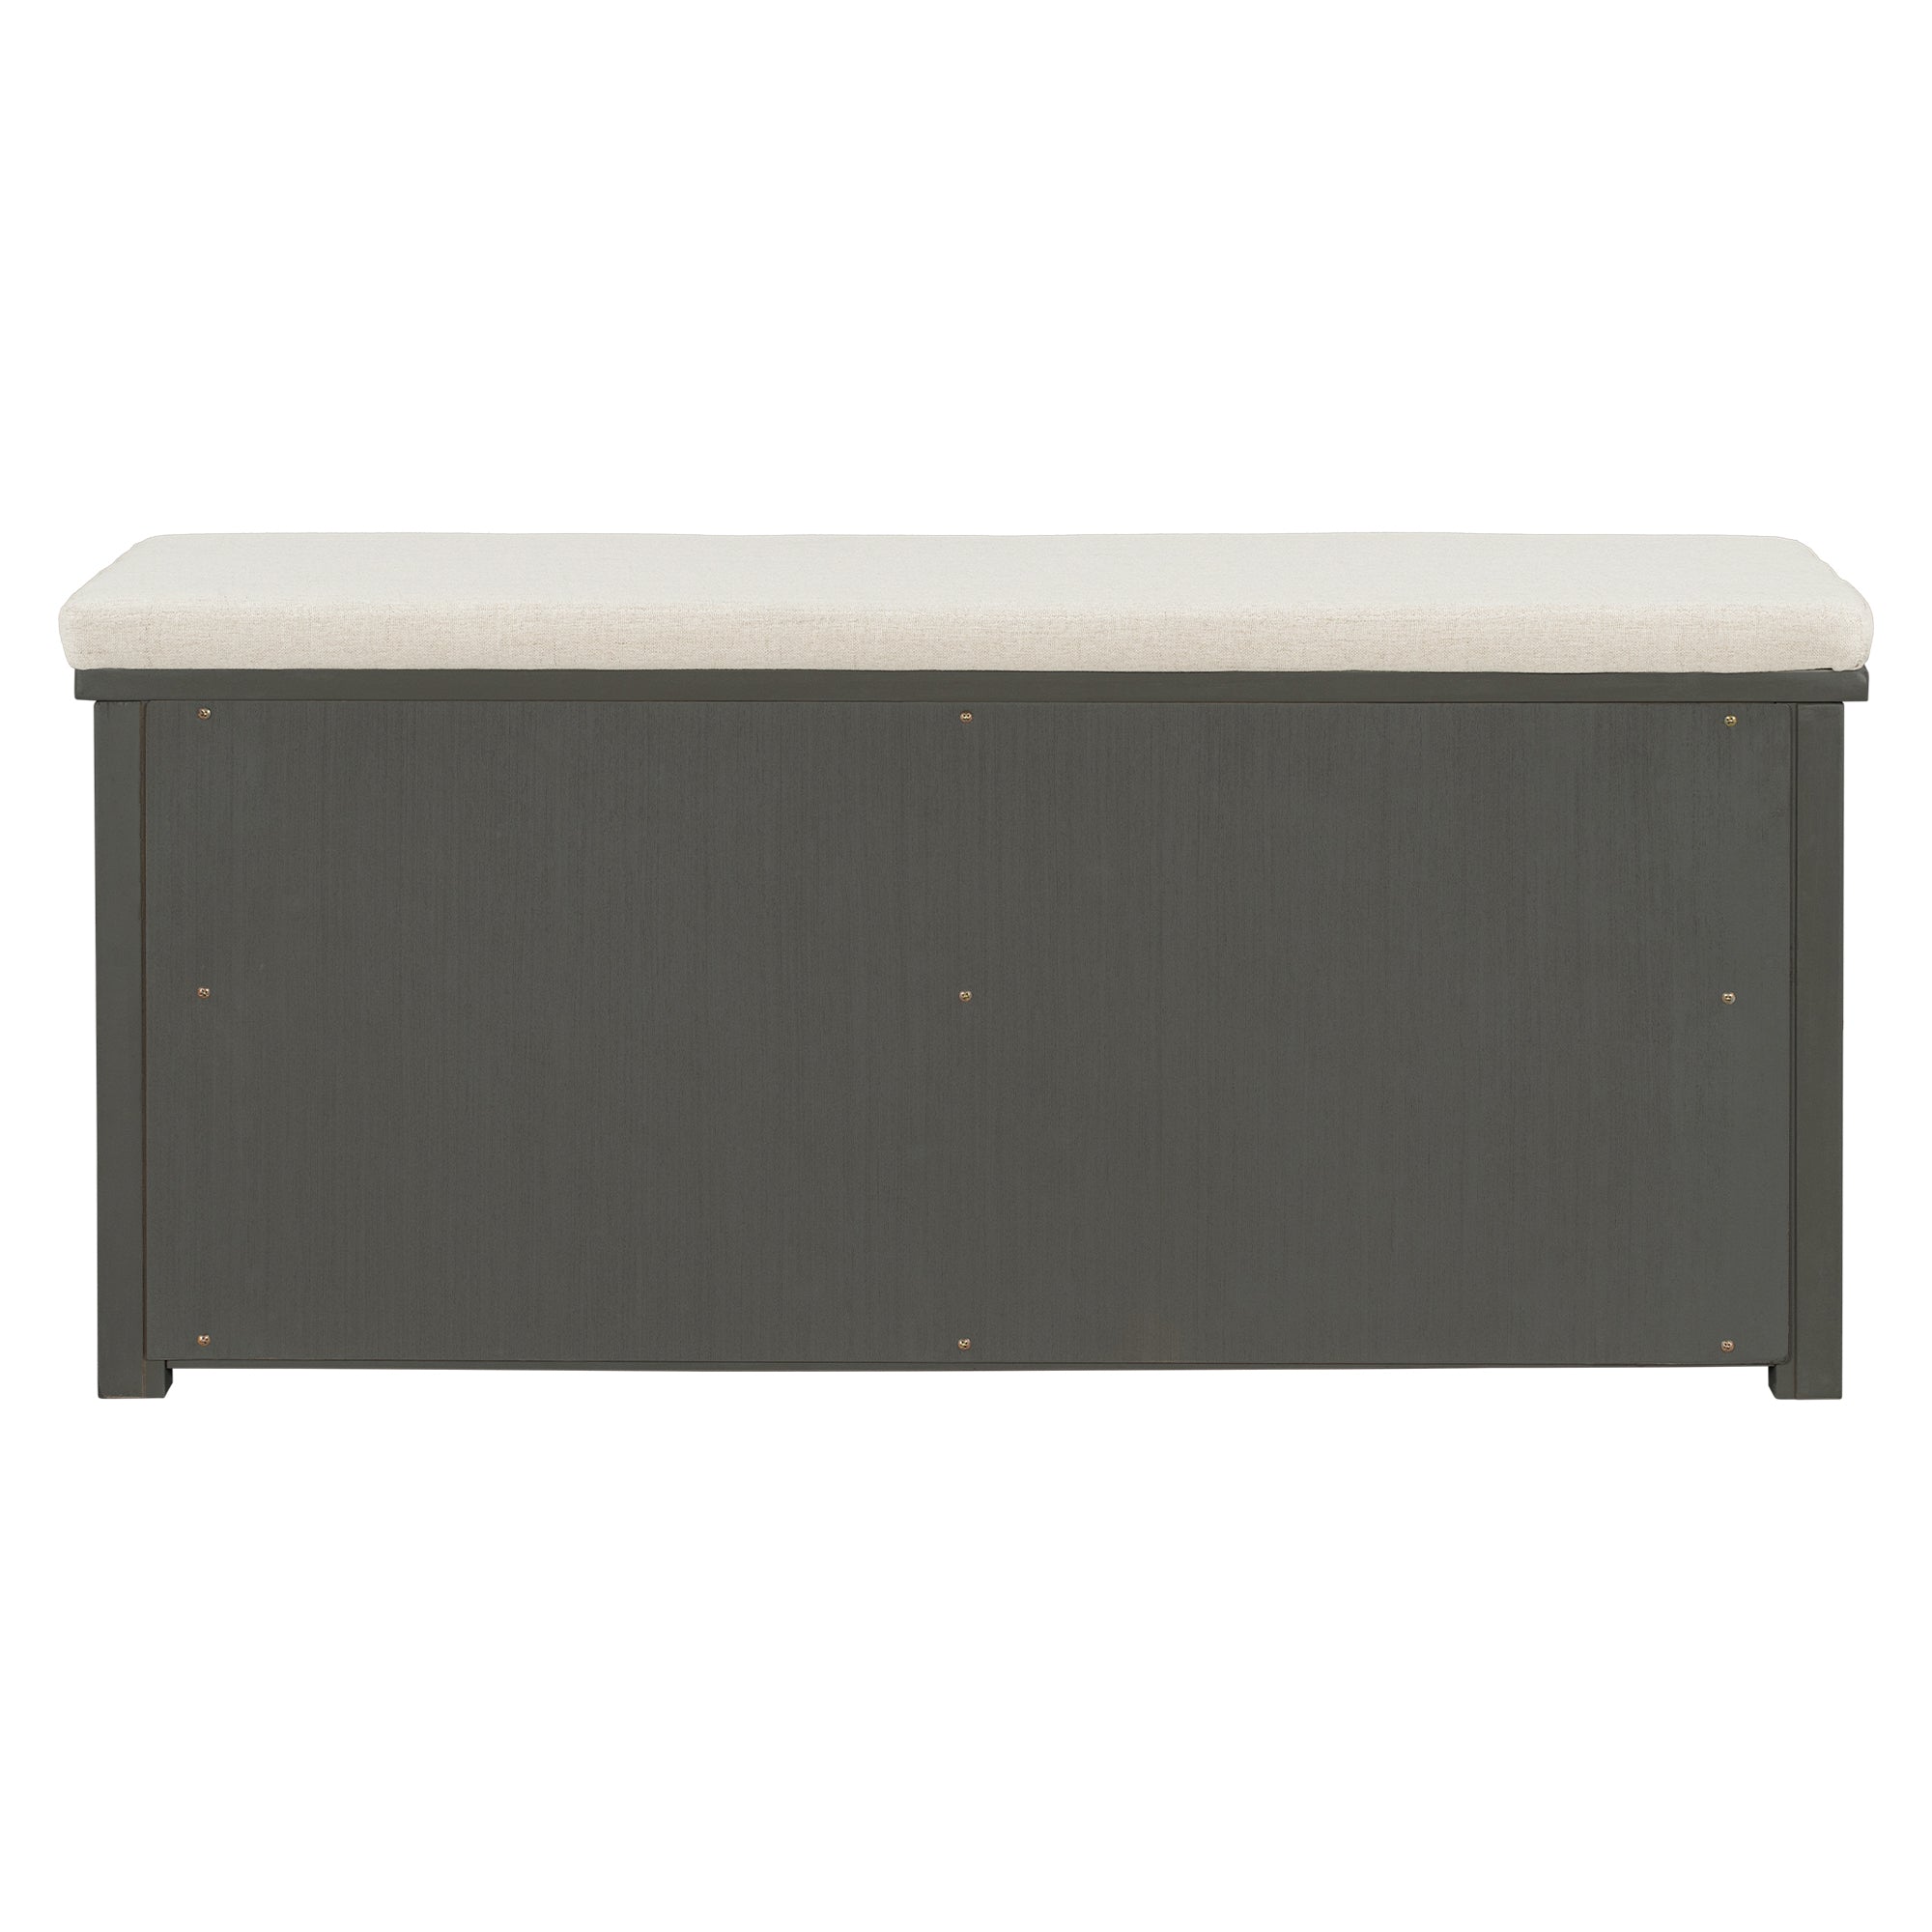 Rustic Style Two-Door Storage Bench, with Linen Upholstered Top Cushion